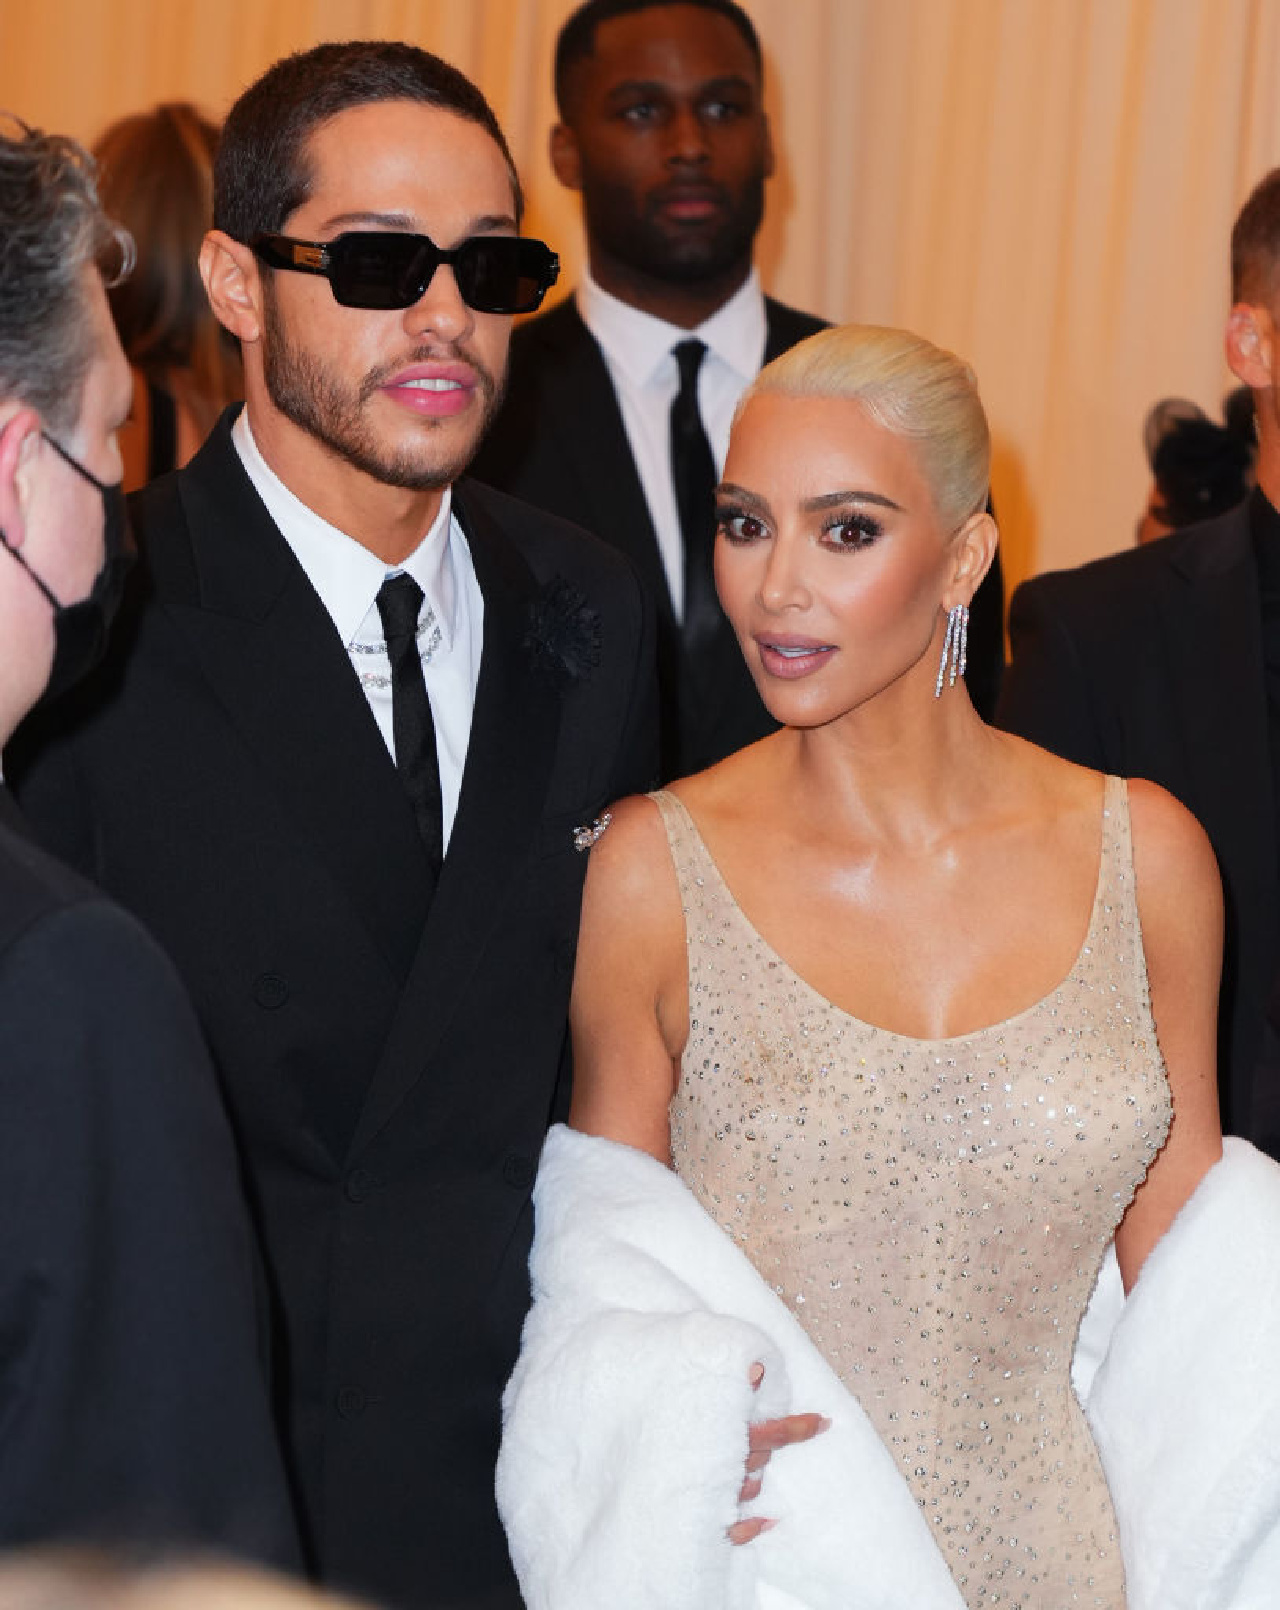 Kim and Pete at the Met Gala, 2022.